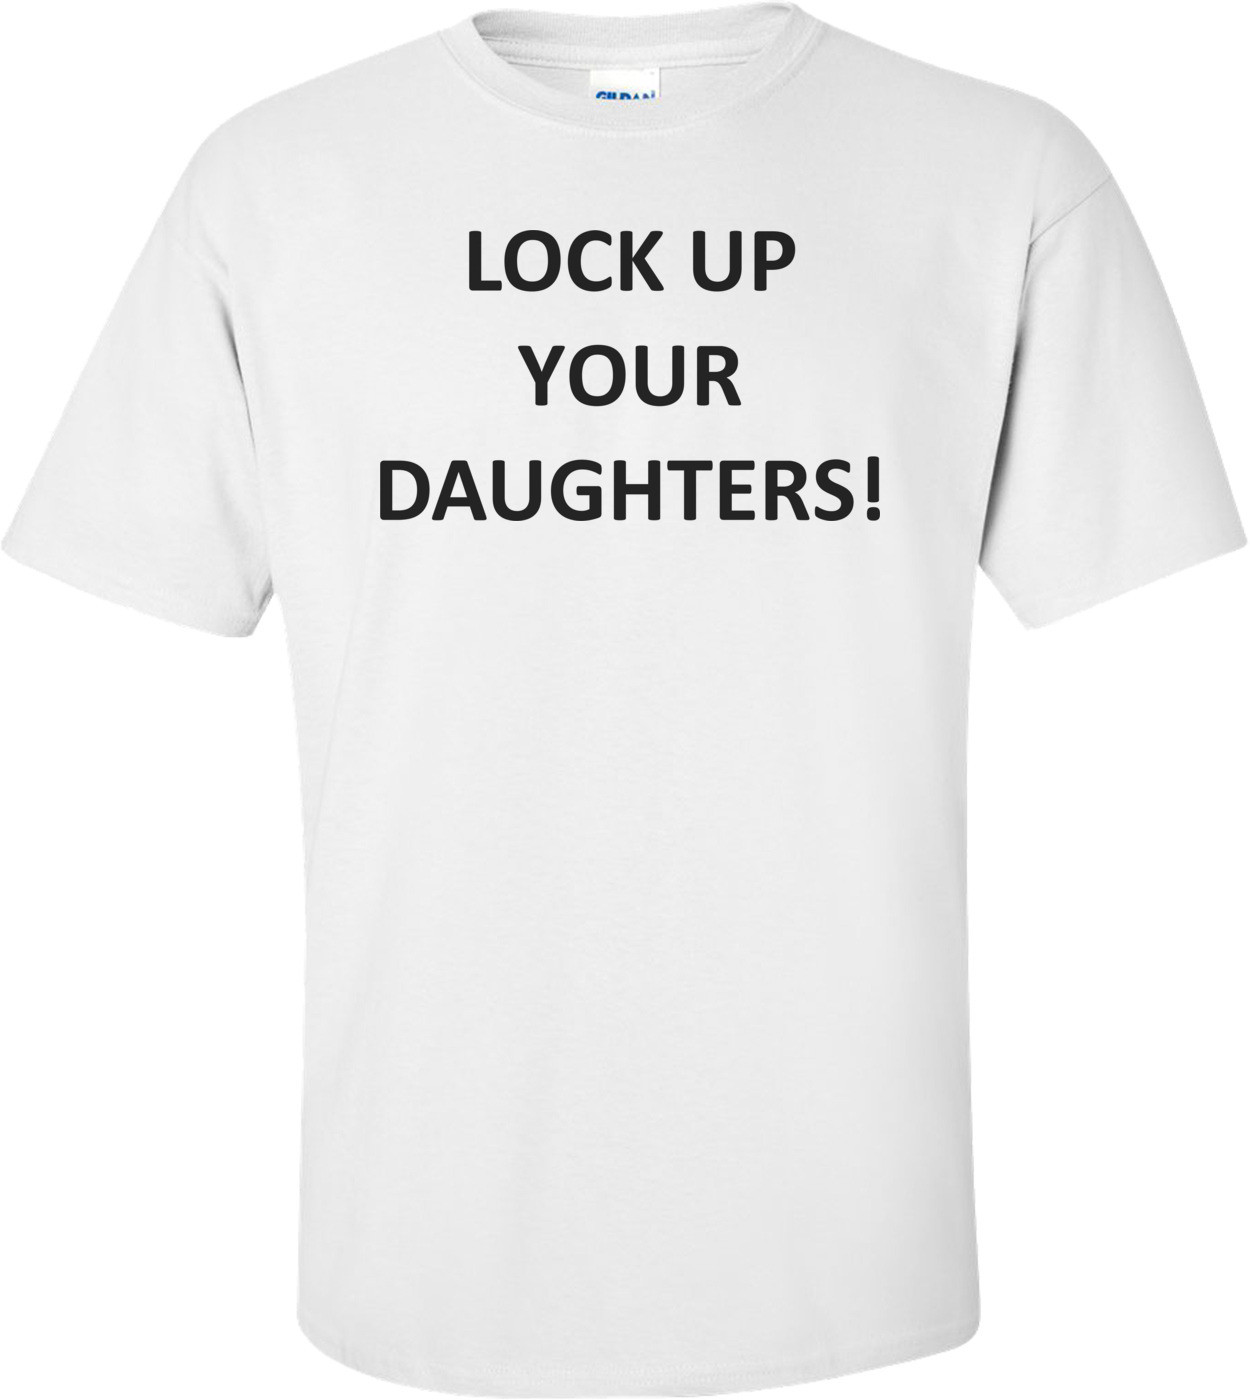 LOCK UP YOUR DAUGHTERS! Shirt